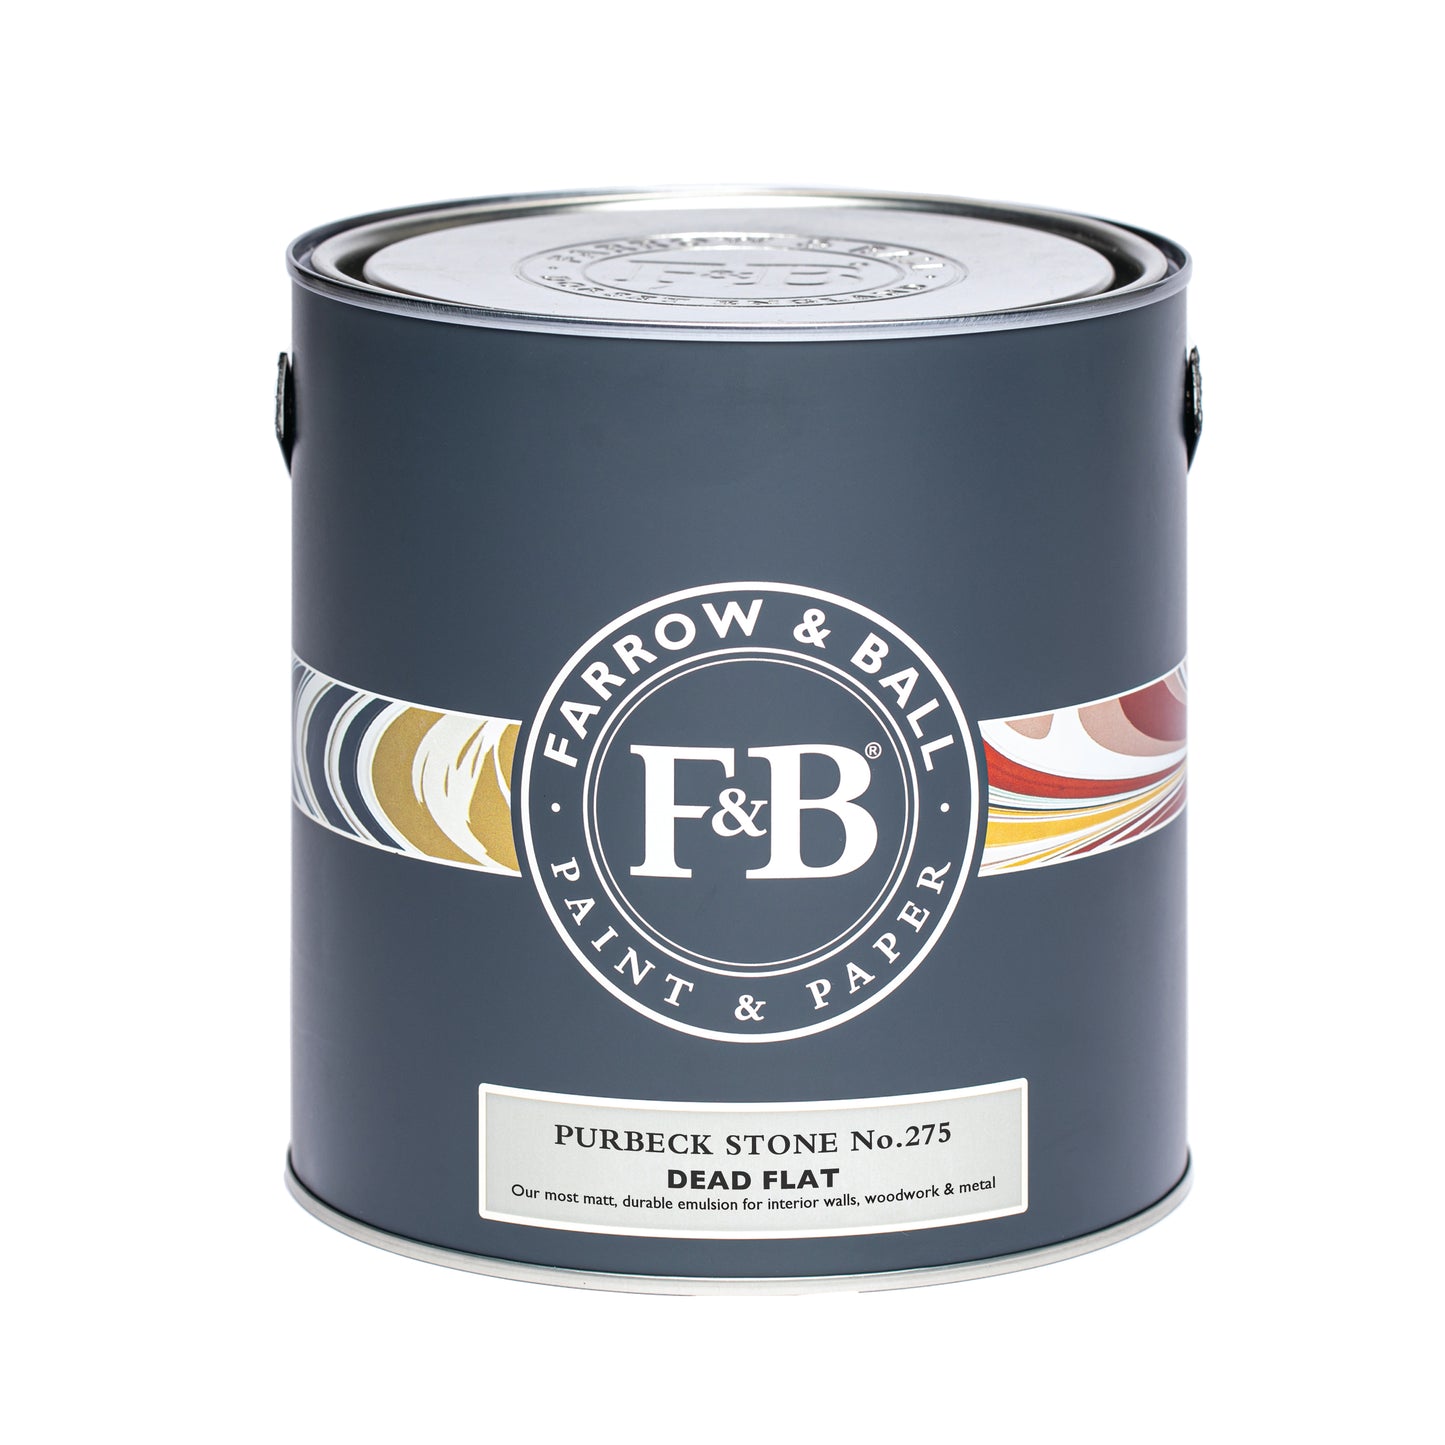 Purbeck Stone 275 - Farrow and Ball - New Dead Flat